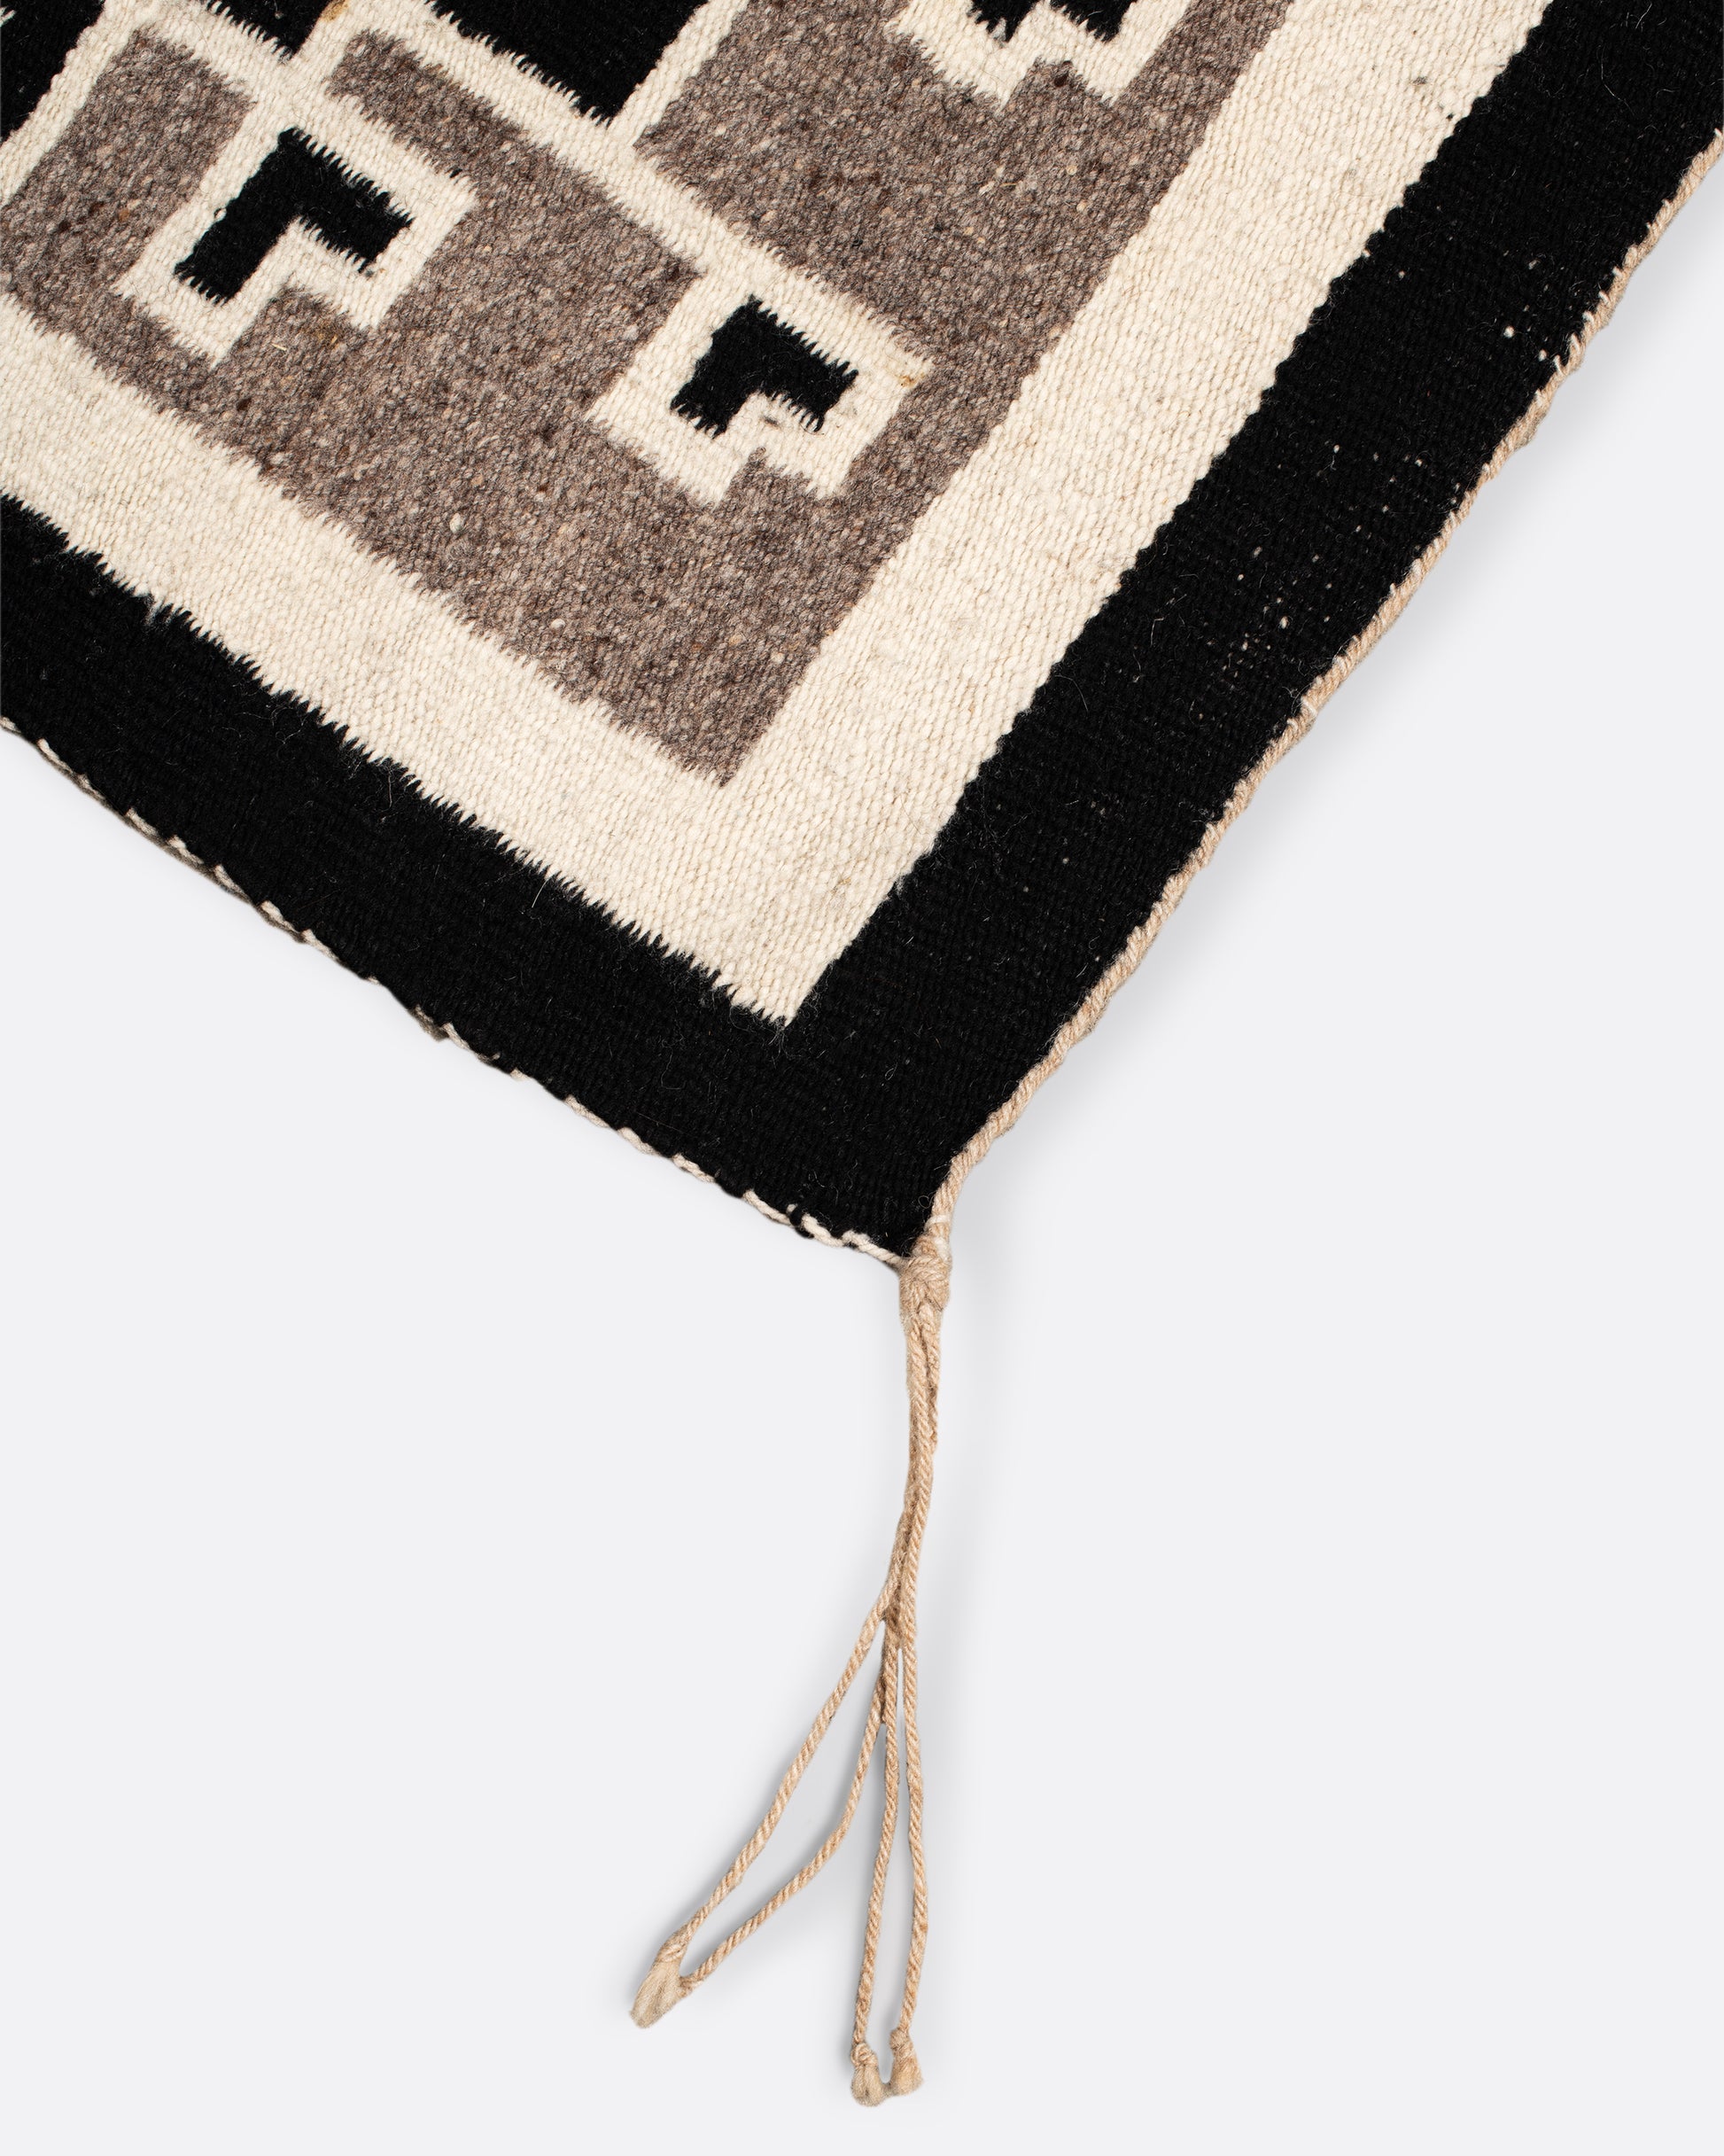 A vintage Navajo rug with the traditional Two Grey Hills weaving